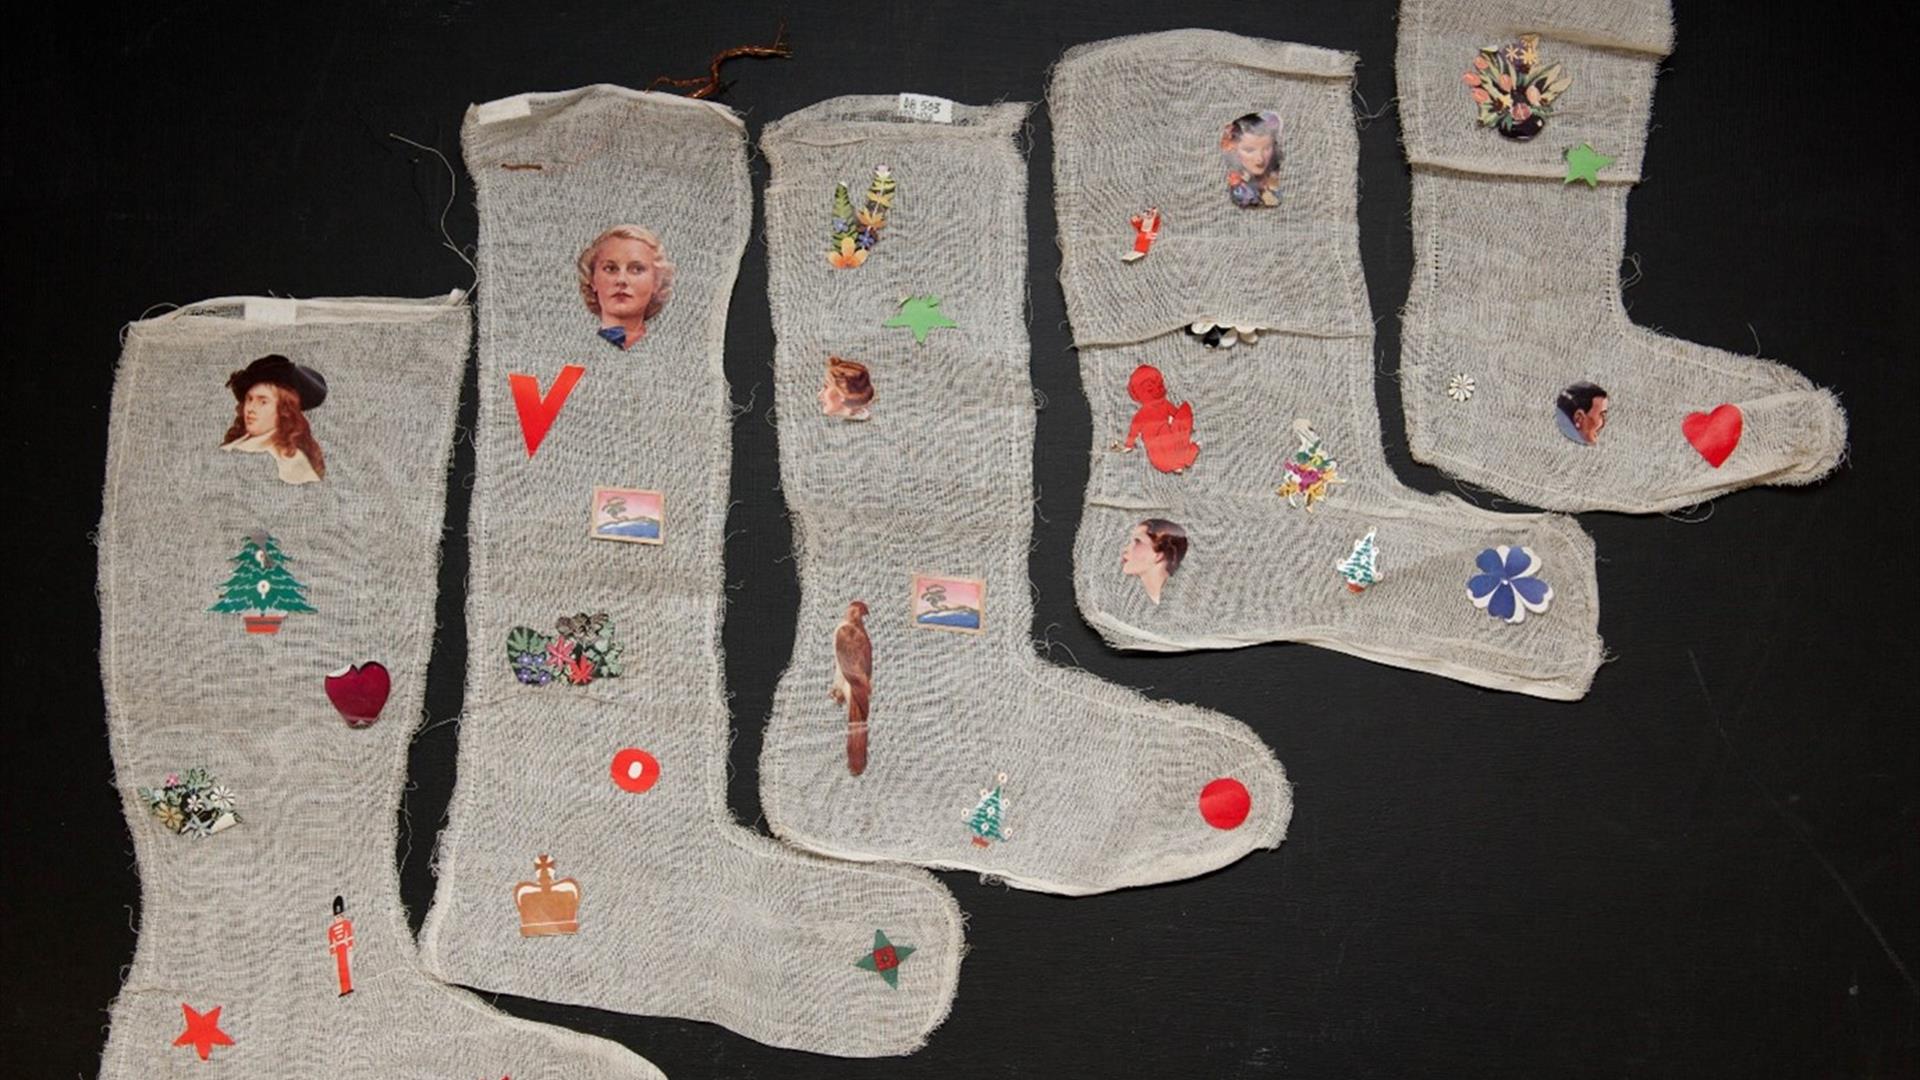 handmade Christmas stockings decorated with magazine cutouts. Part of the DCM collection.